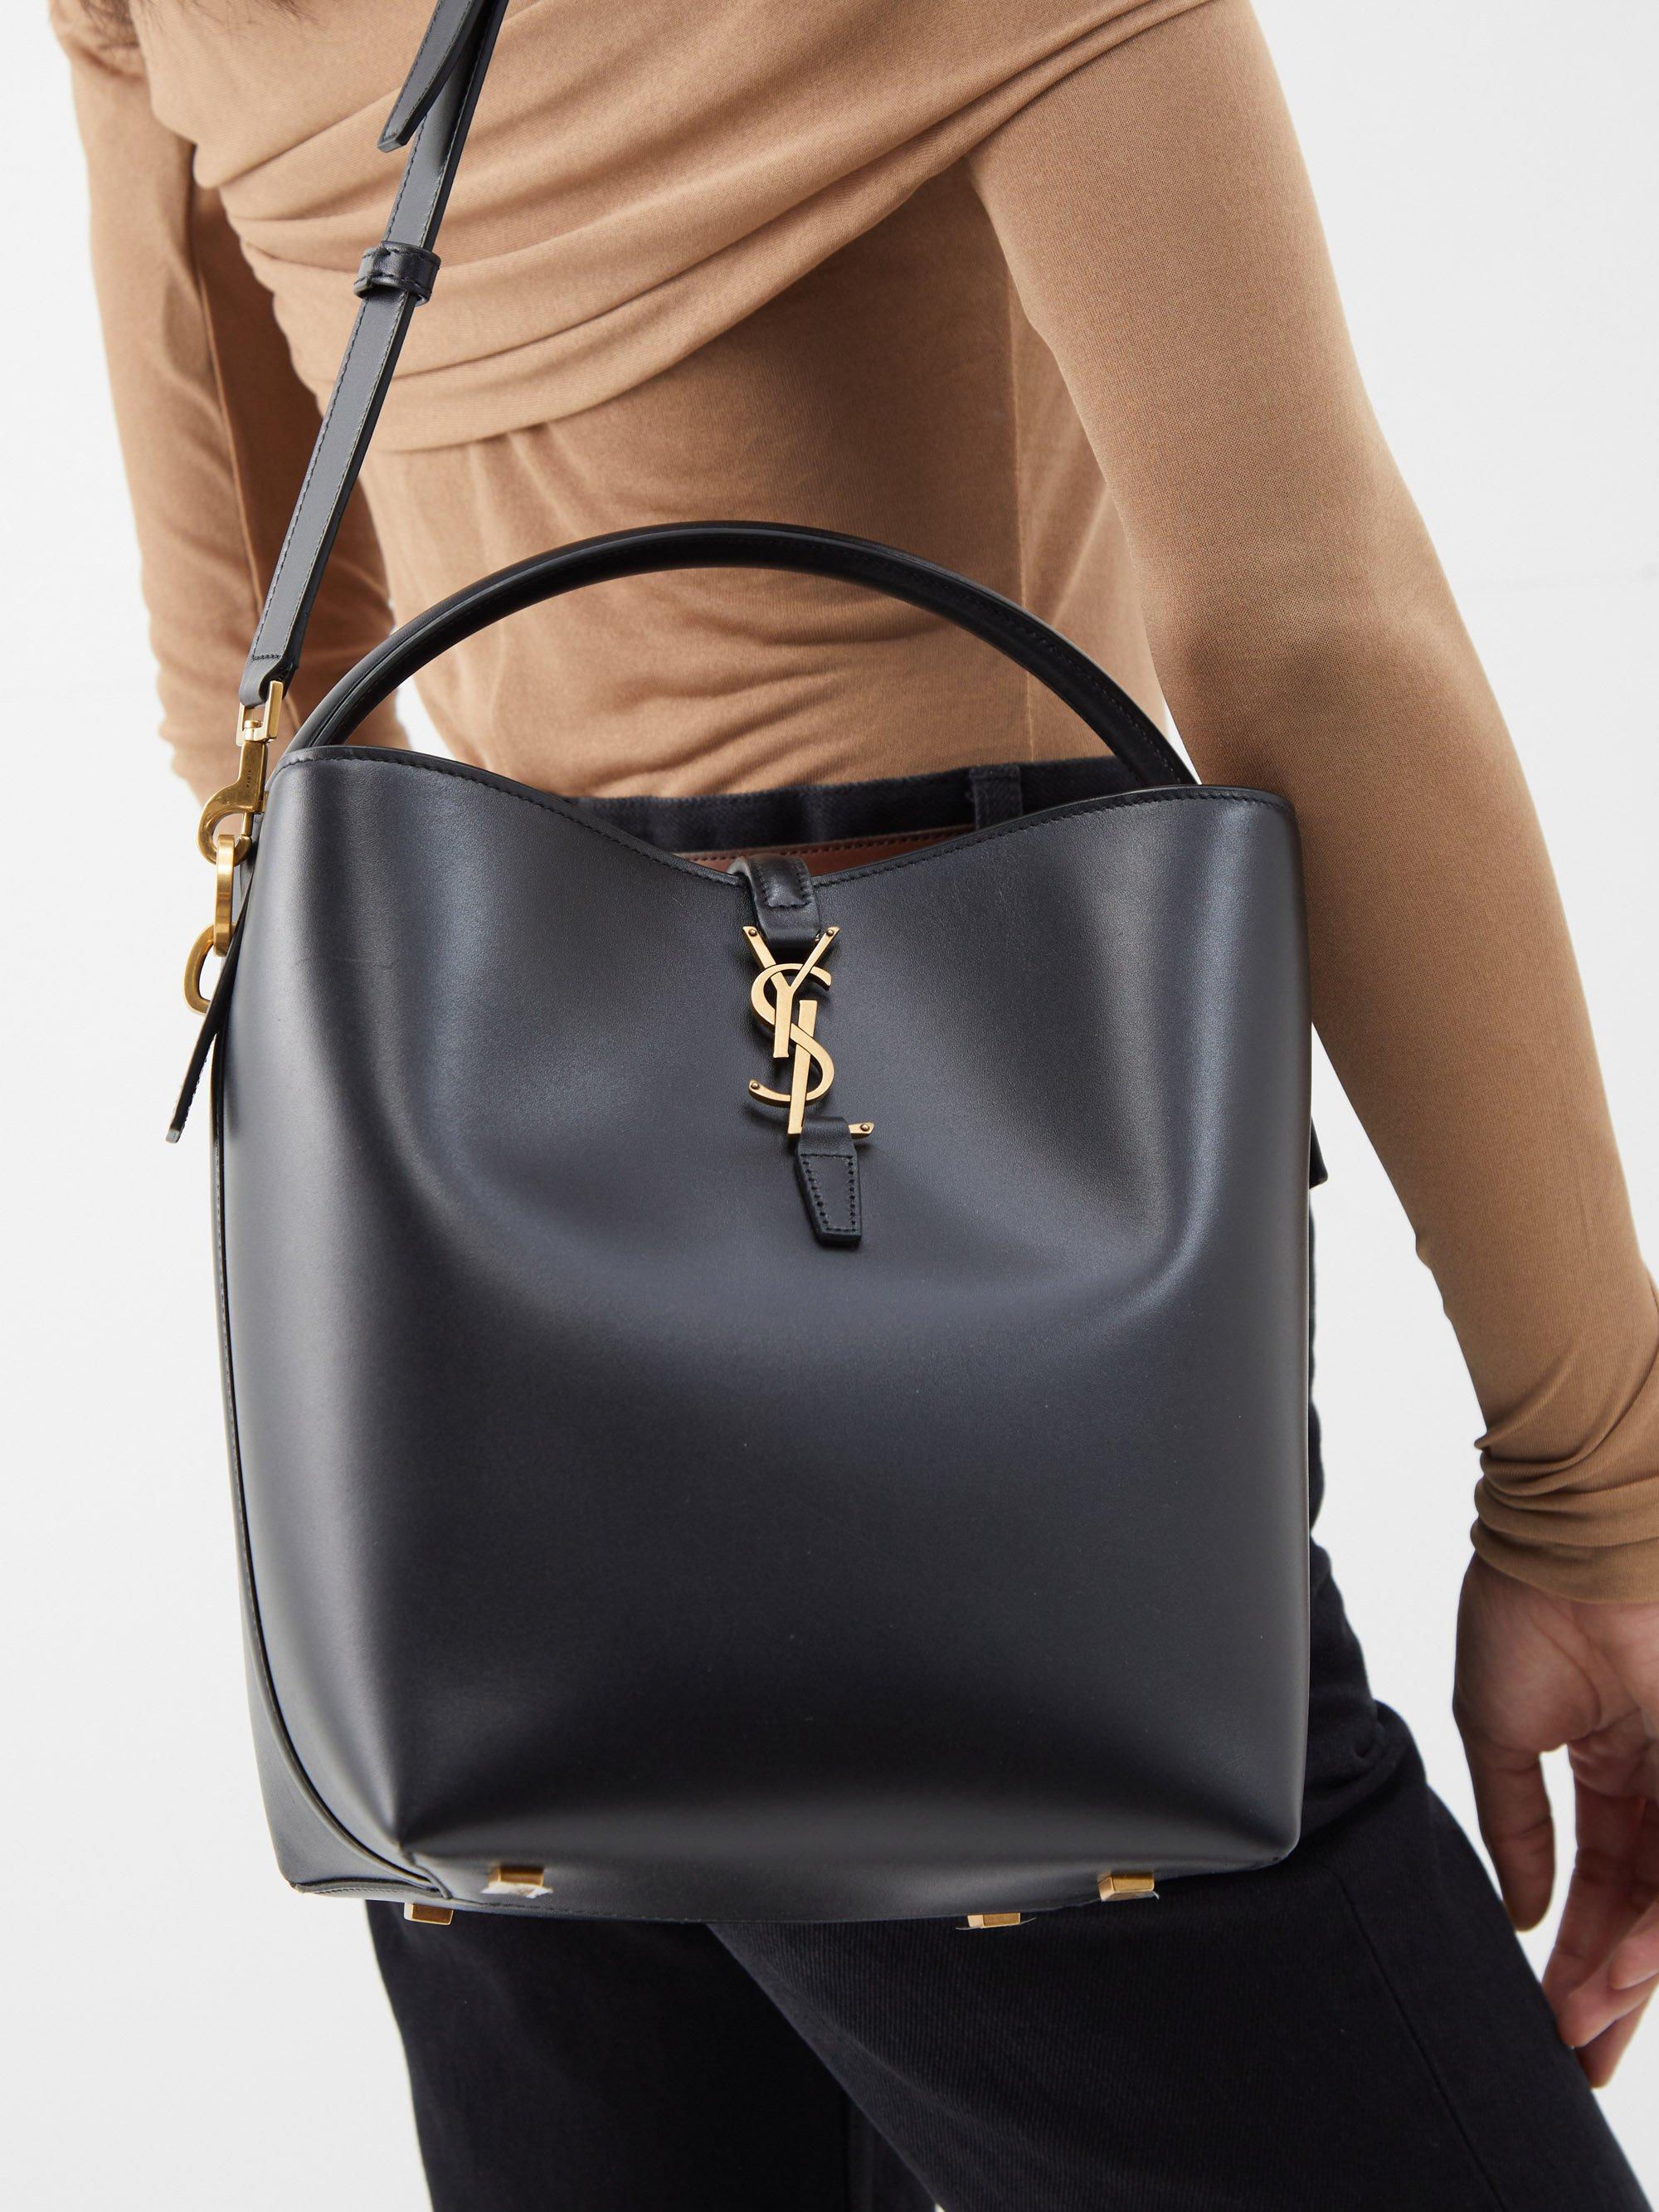 The Saint Laurent Le37 Bucket Bag is a classy and practical tote that  you'll use forever